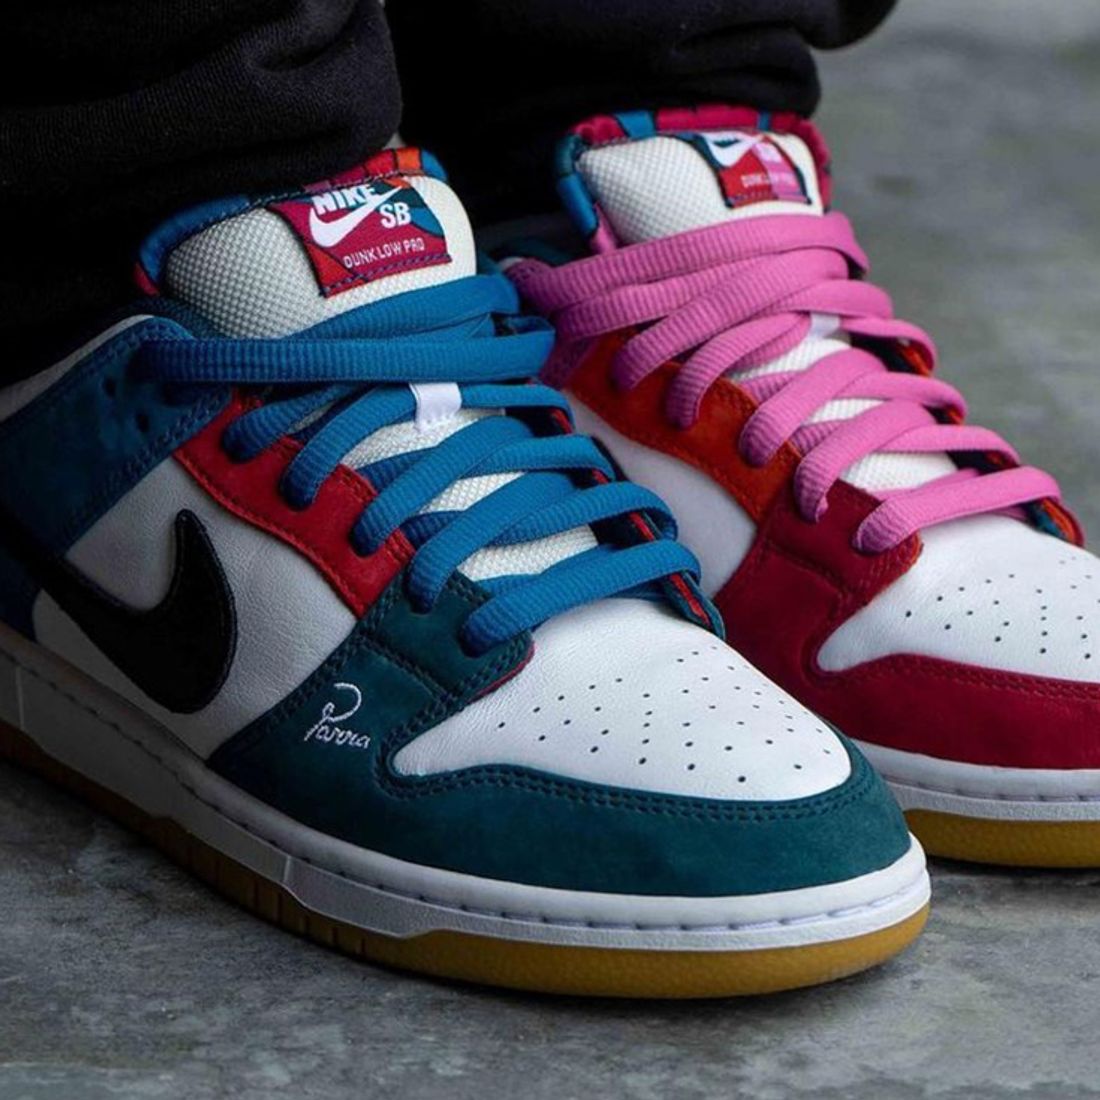 Look: Parra x Nike SB Dunk Low, Possibly 'Friends and - Freaker